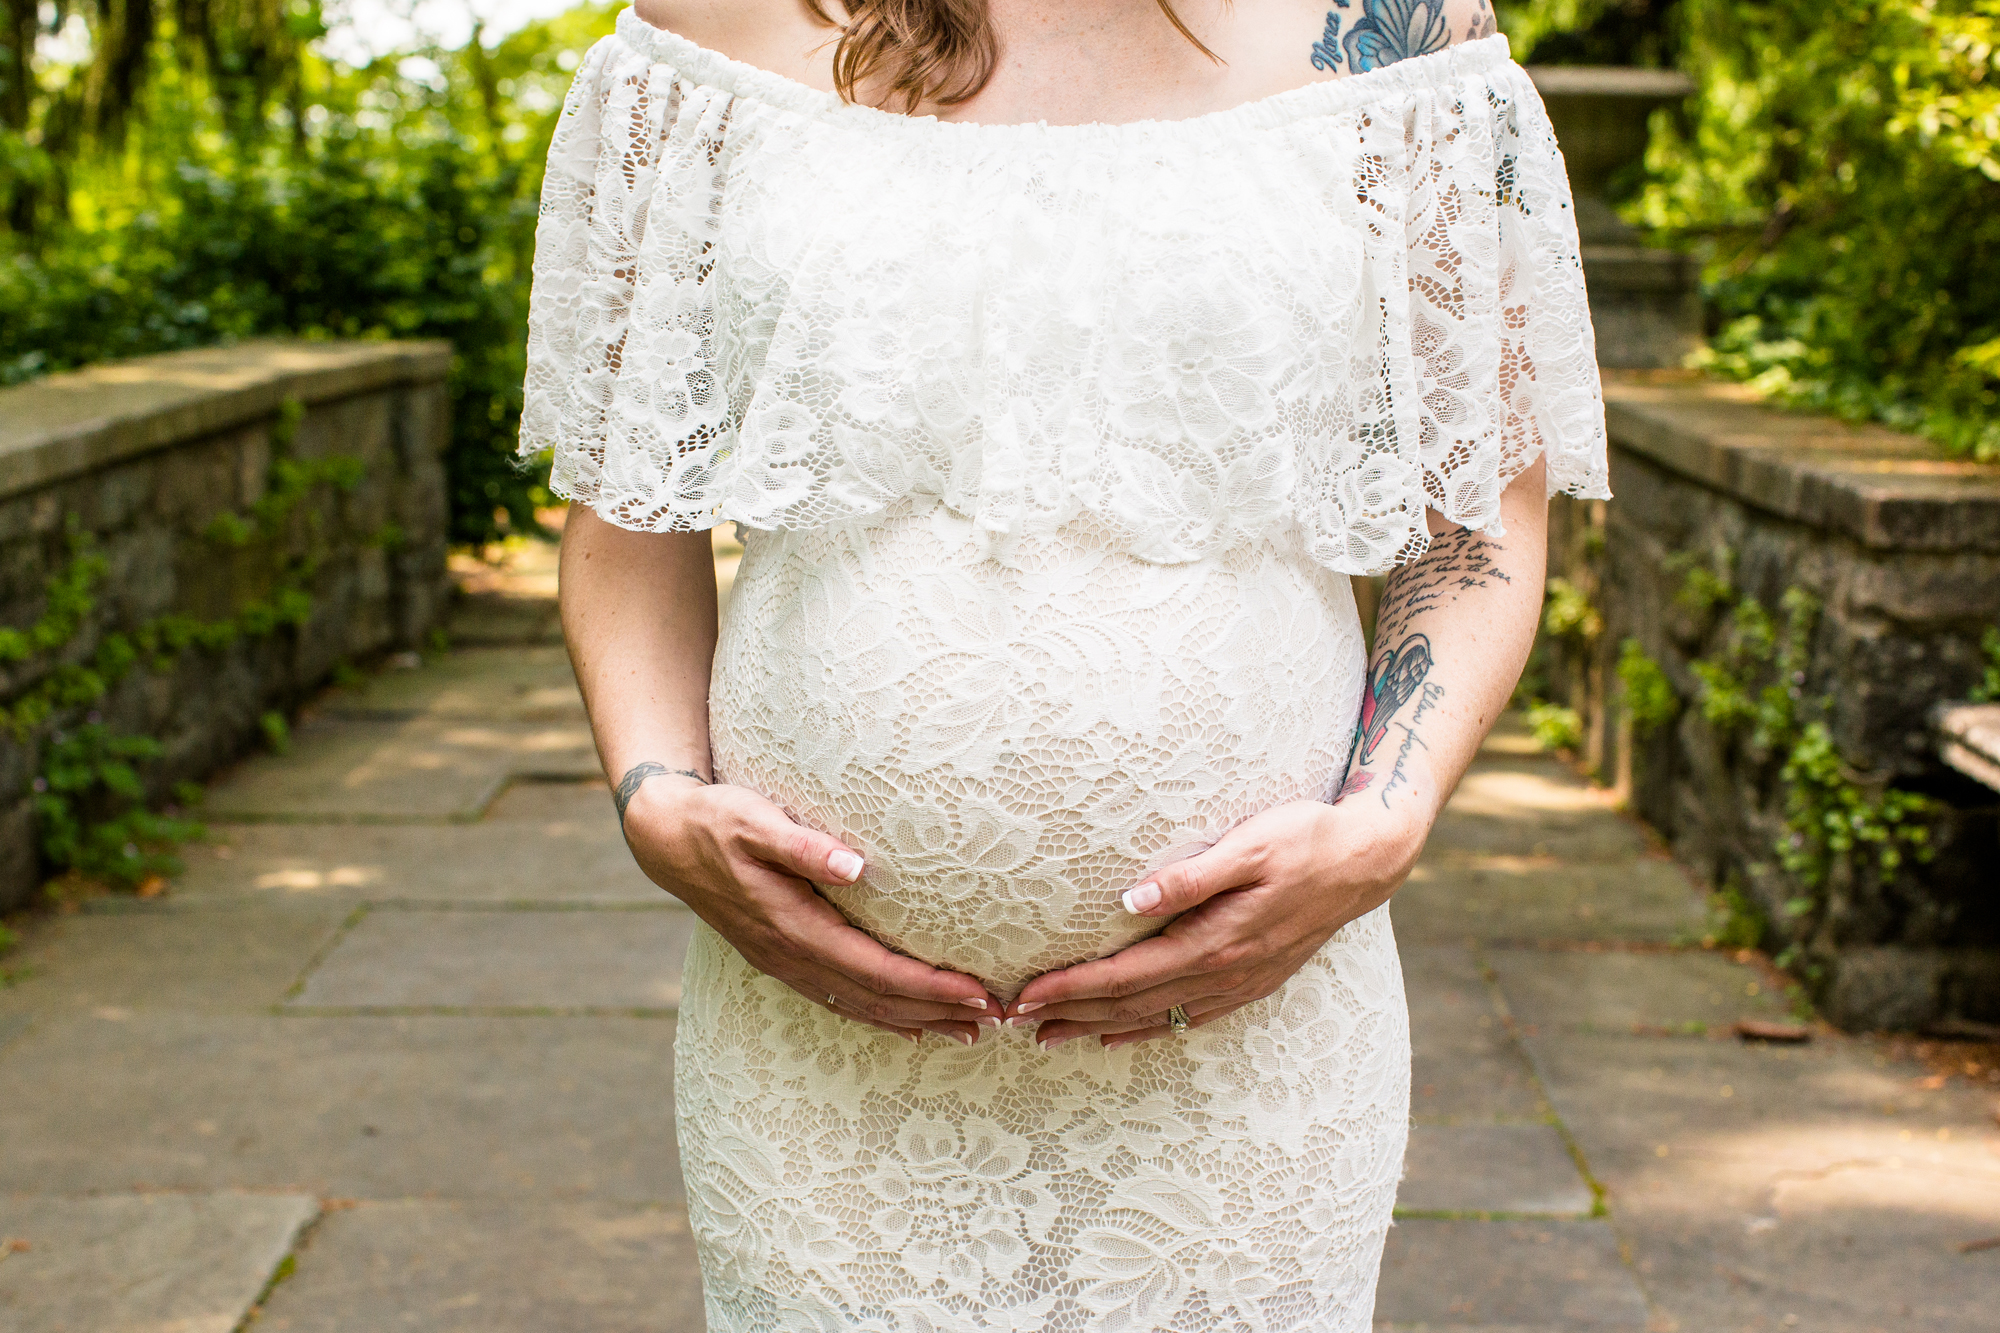 Closeup of a woman holding her pregnant belly while wearing a wedding dress.